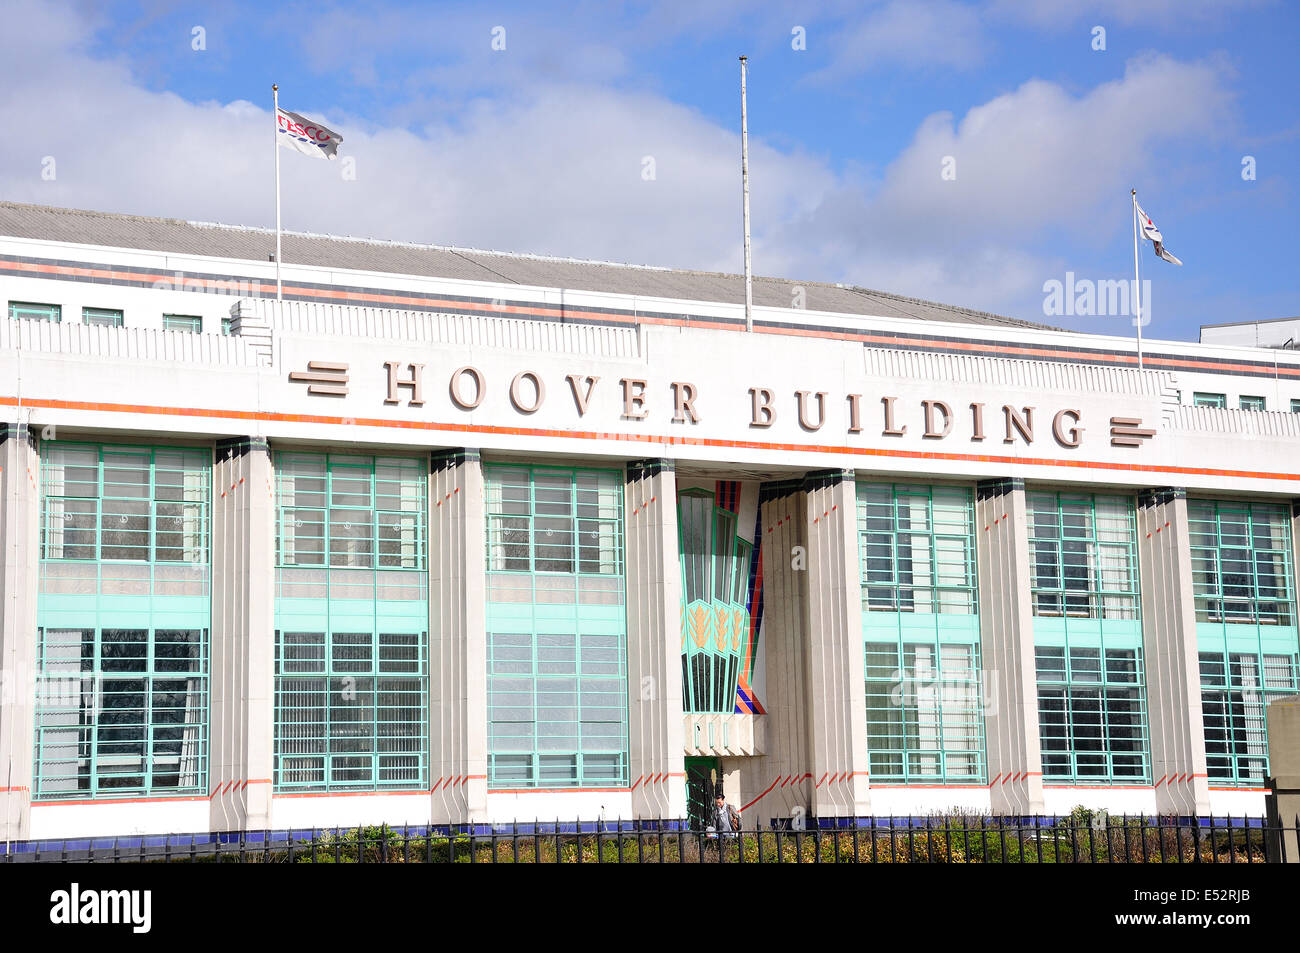 Hoover Art Deco Building at night built in 1933 in Perivale,Ealing,London  England Stock Photo - Alamy